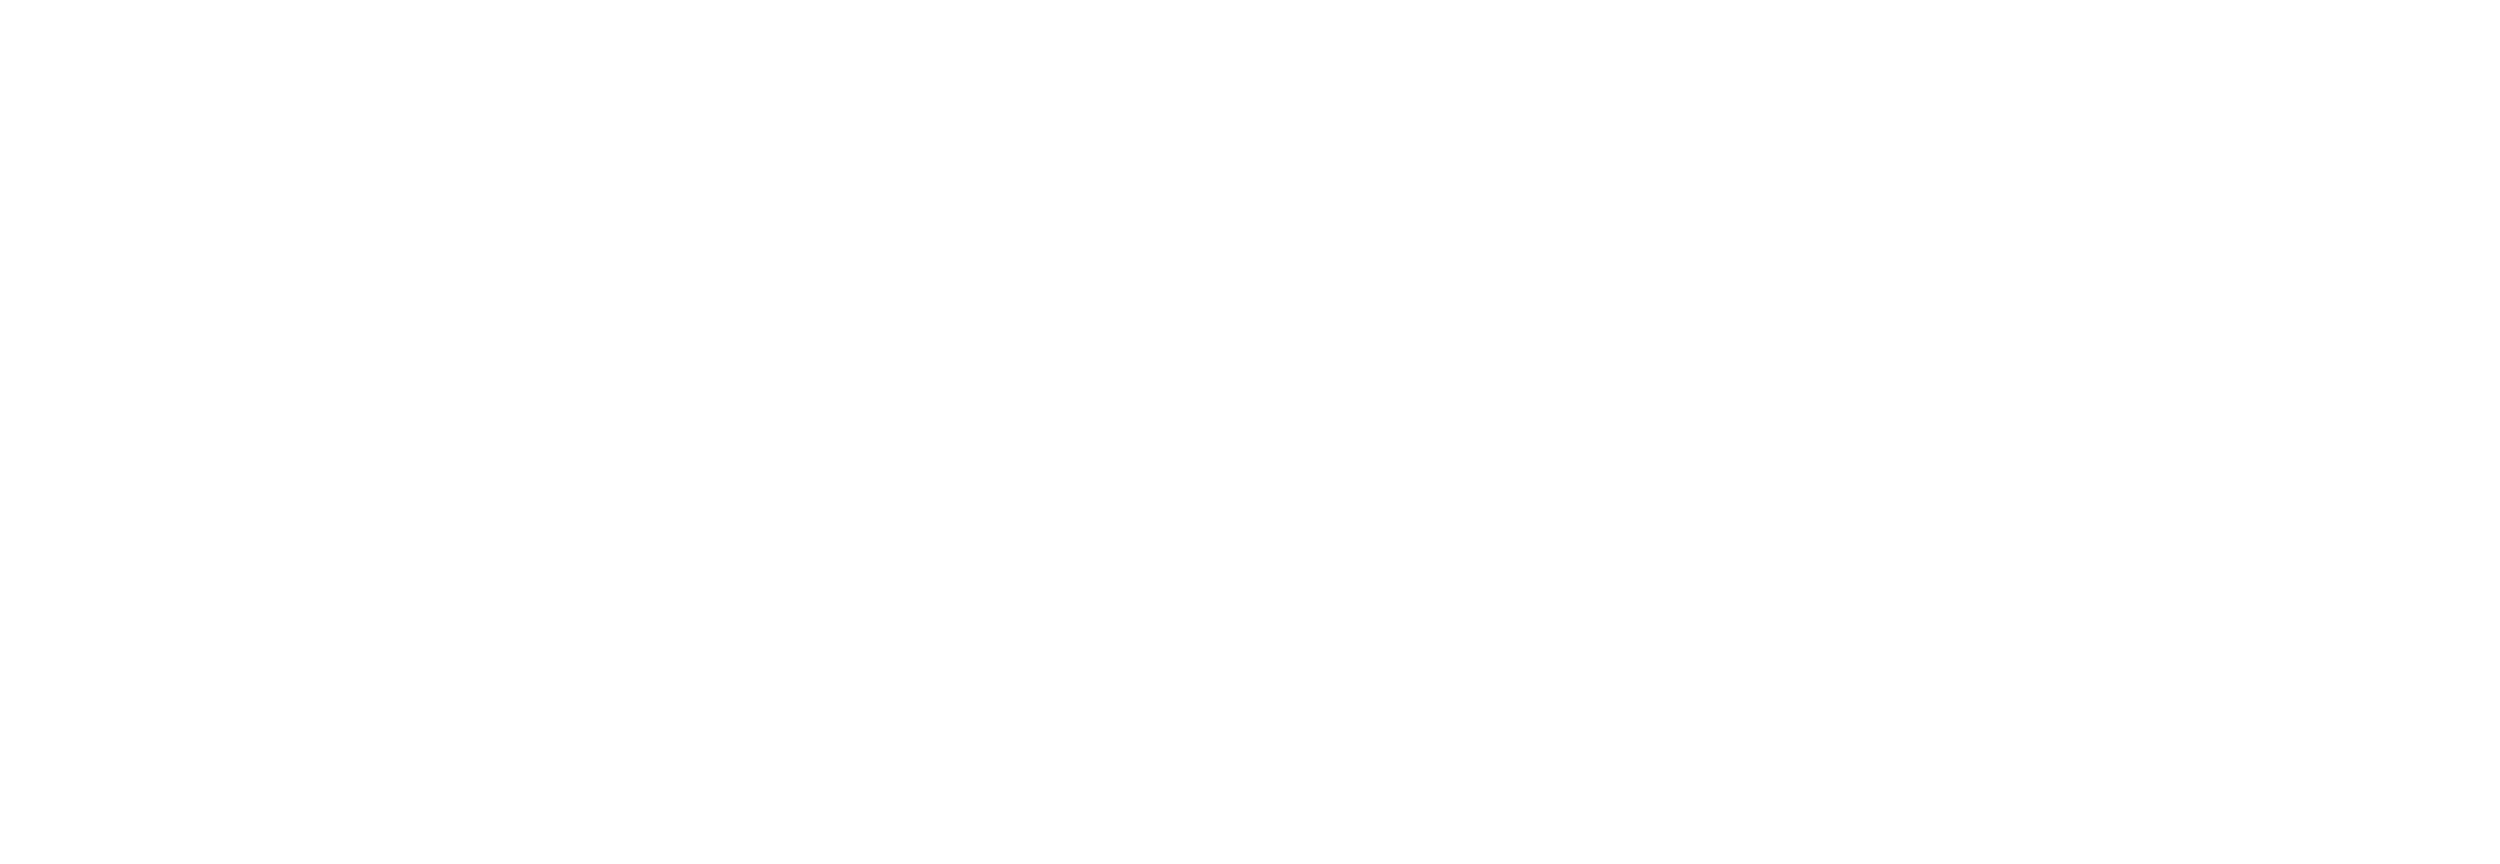 The Resilience Coach